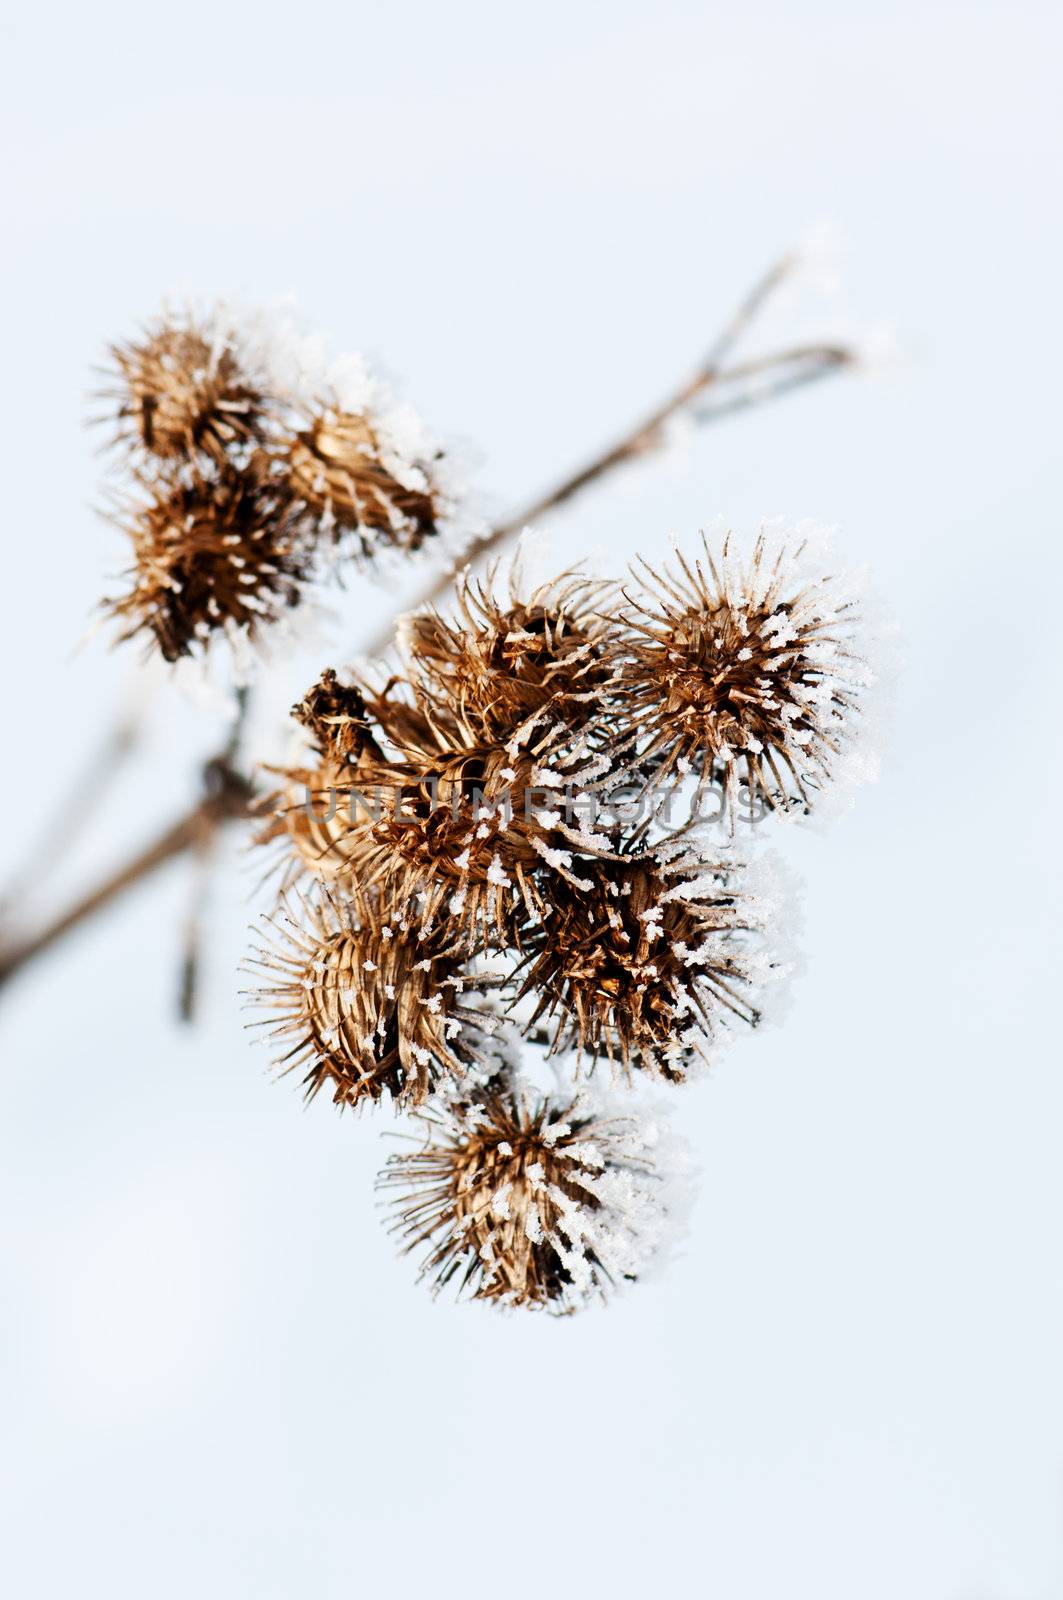 Dried flowers are covered with frost close up